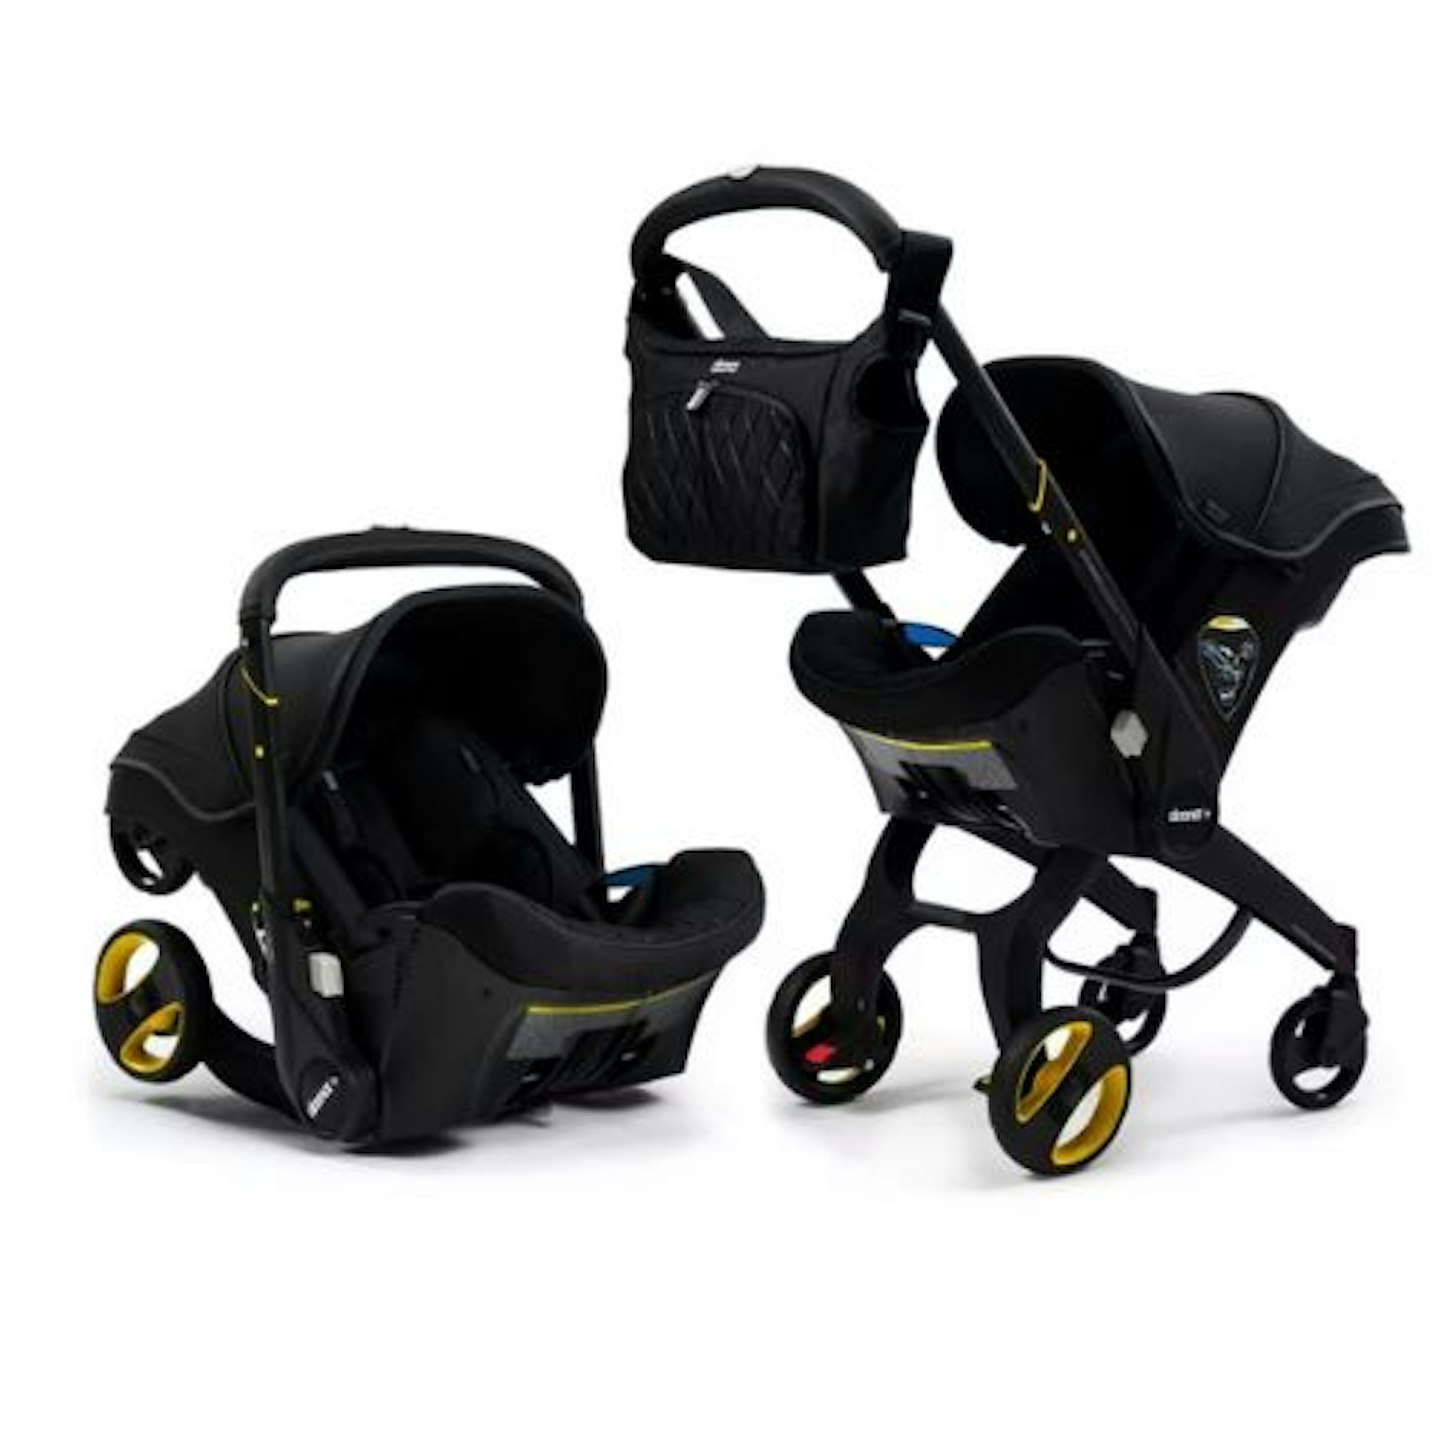 Doona Infant Car Seat Limited Edition Midnight